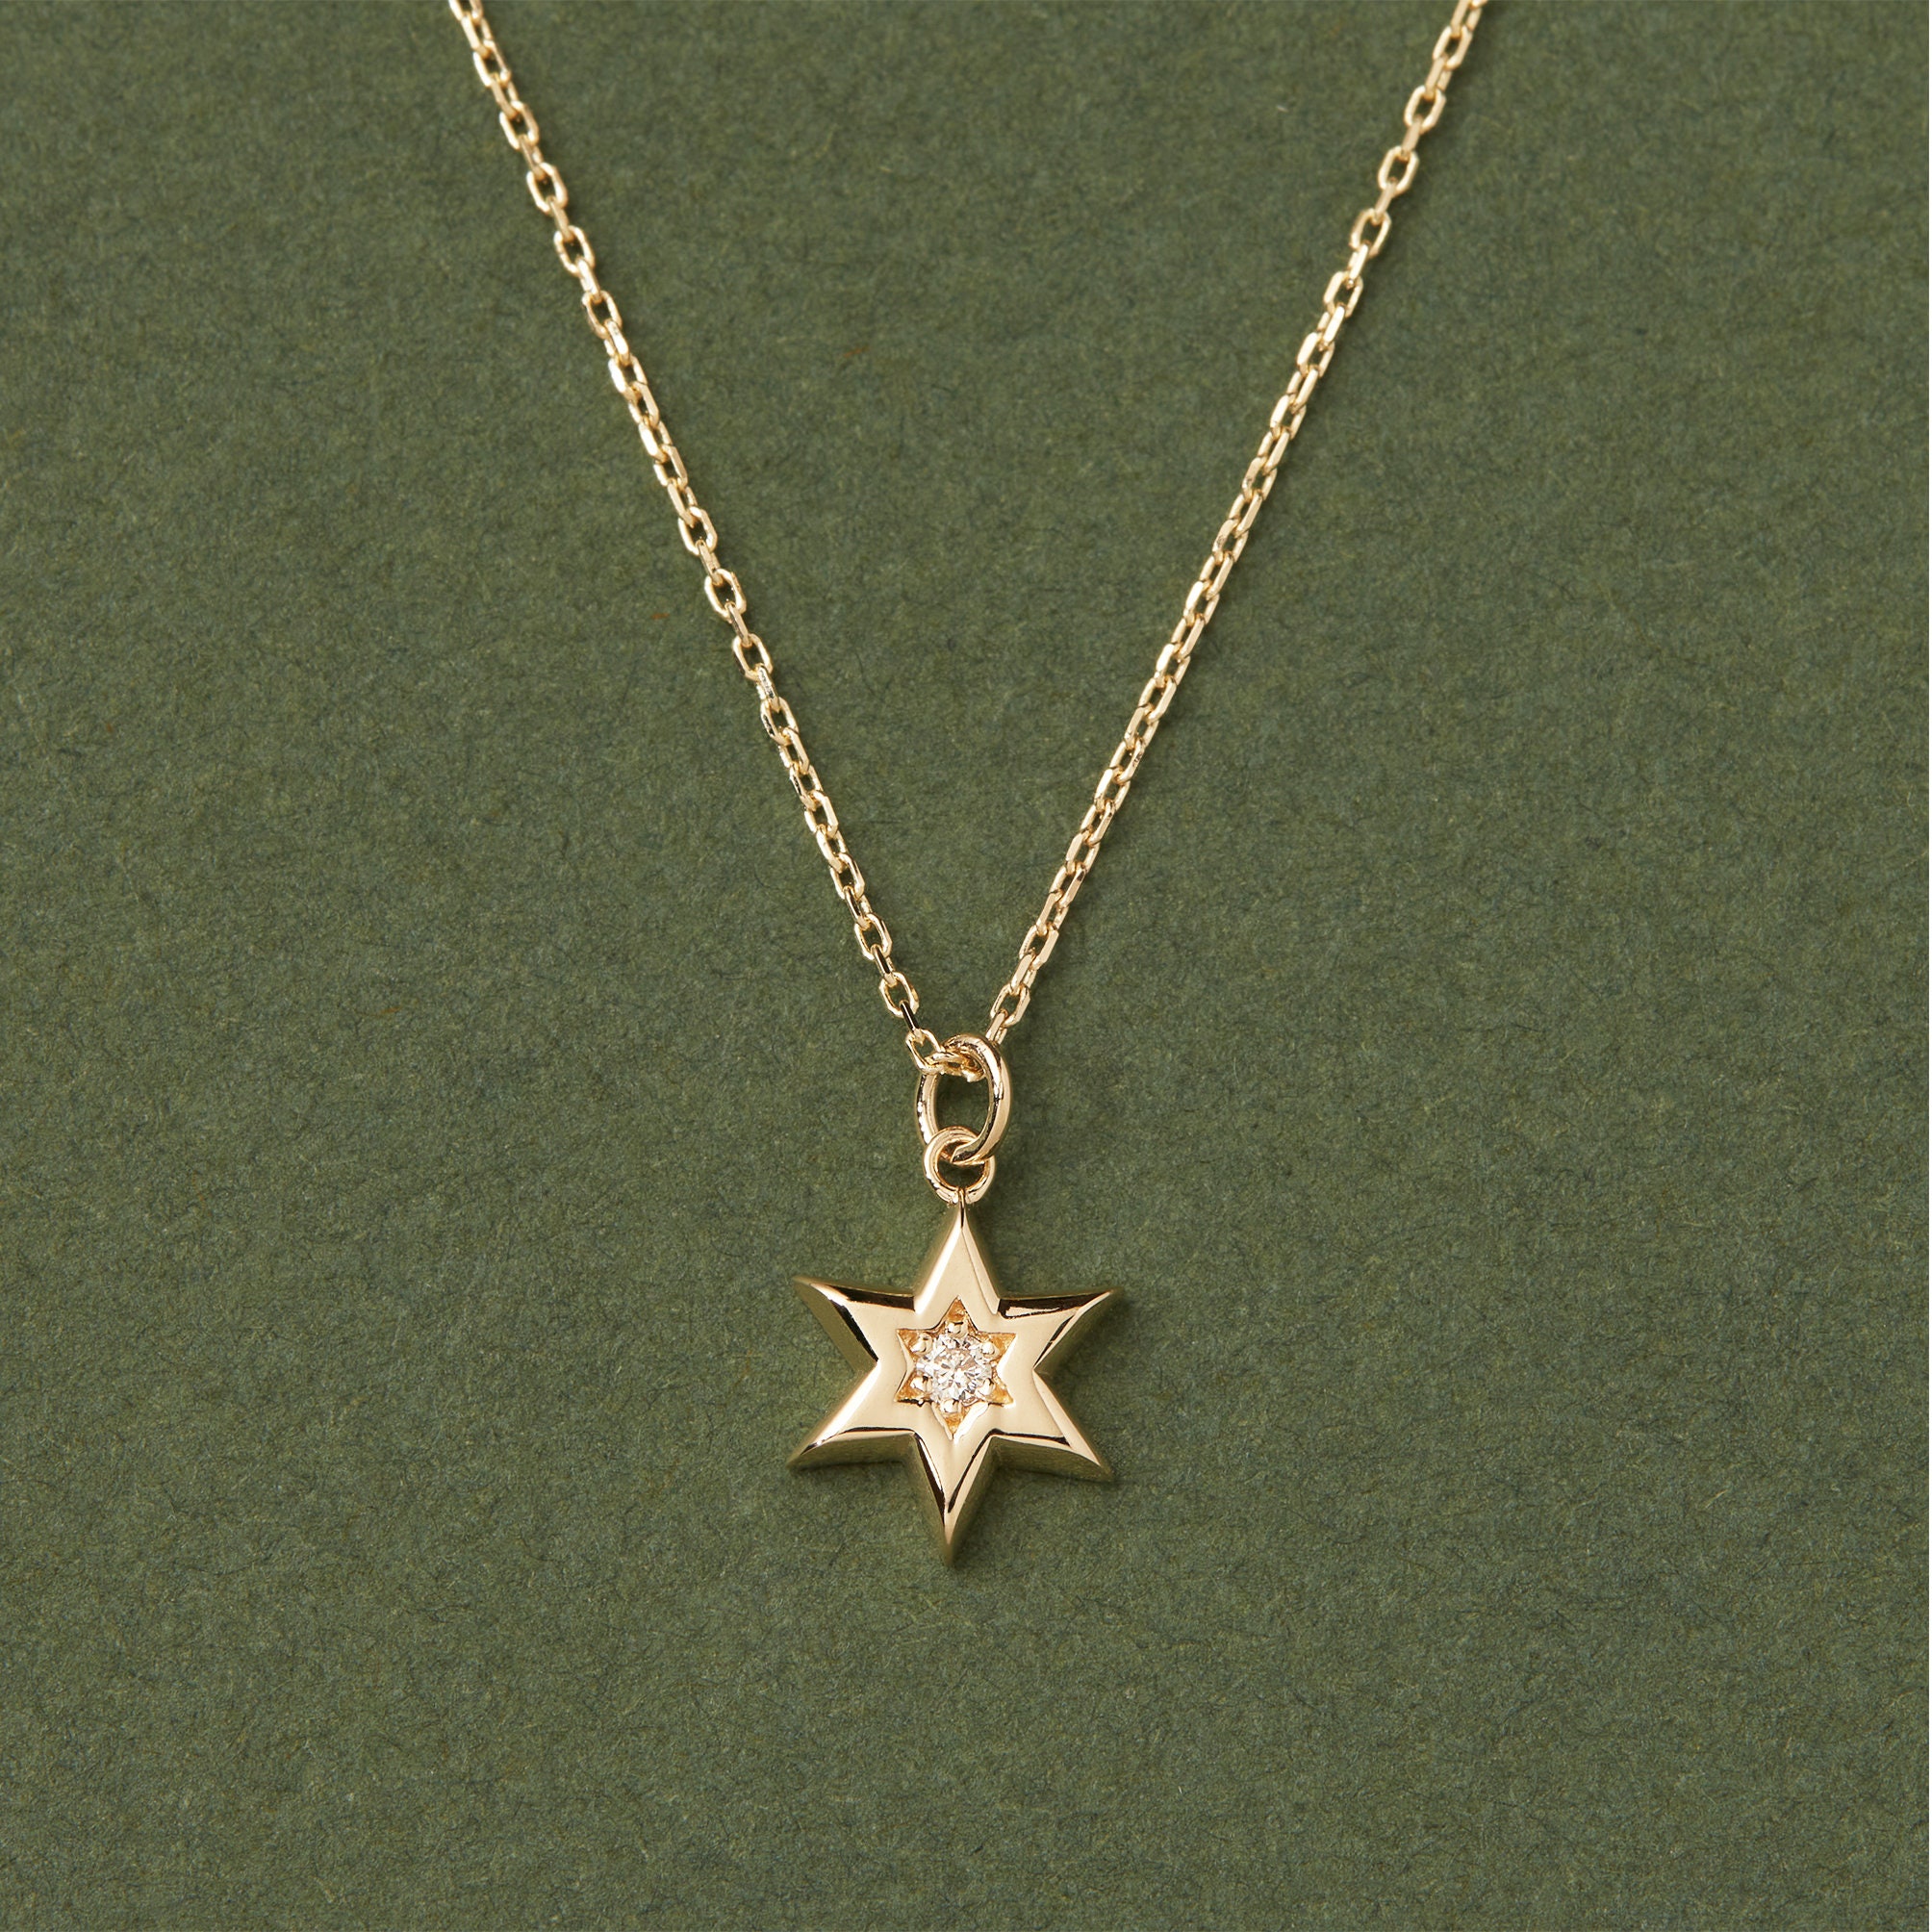 Diamond Tiny Star of David Necklace 14k Solid Gold Magen Star Jewish Jewelry  for Women Diamond Jewish Star Pendant Mother\'s Day Gifts - Etsy